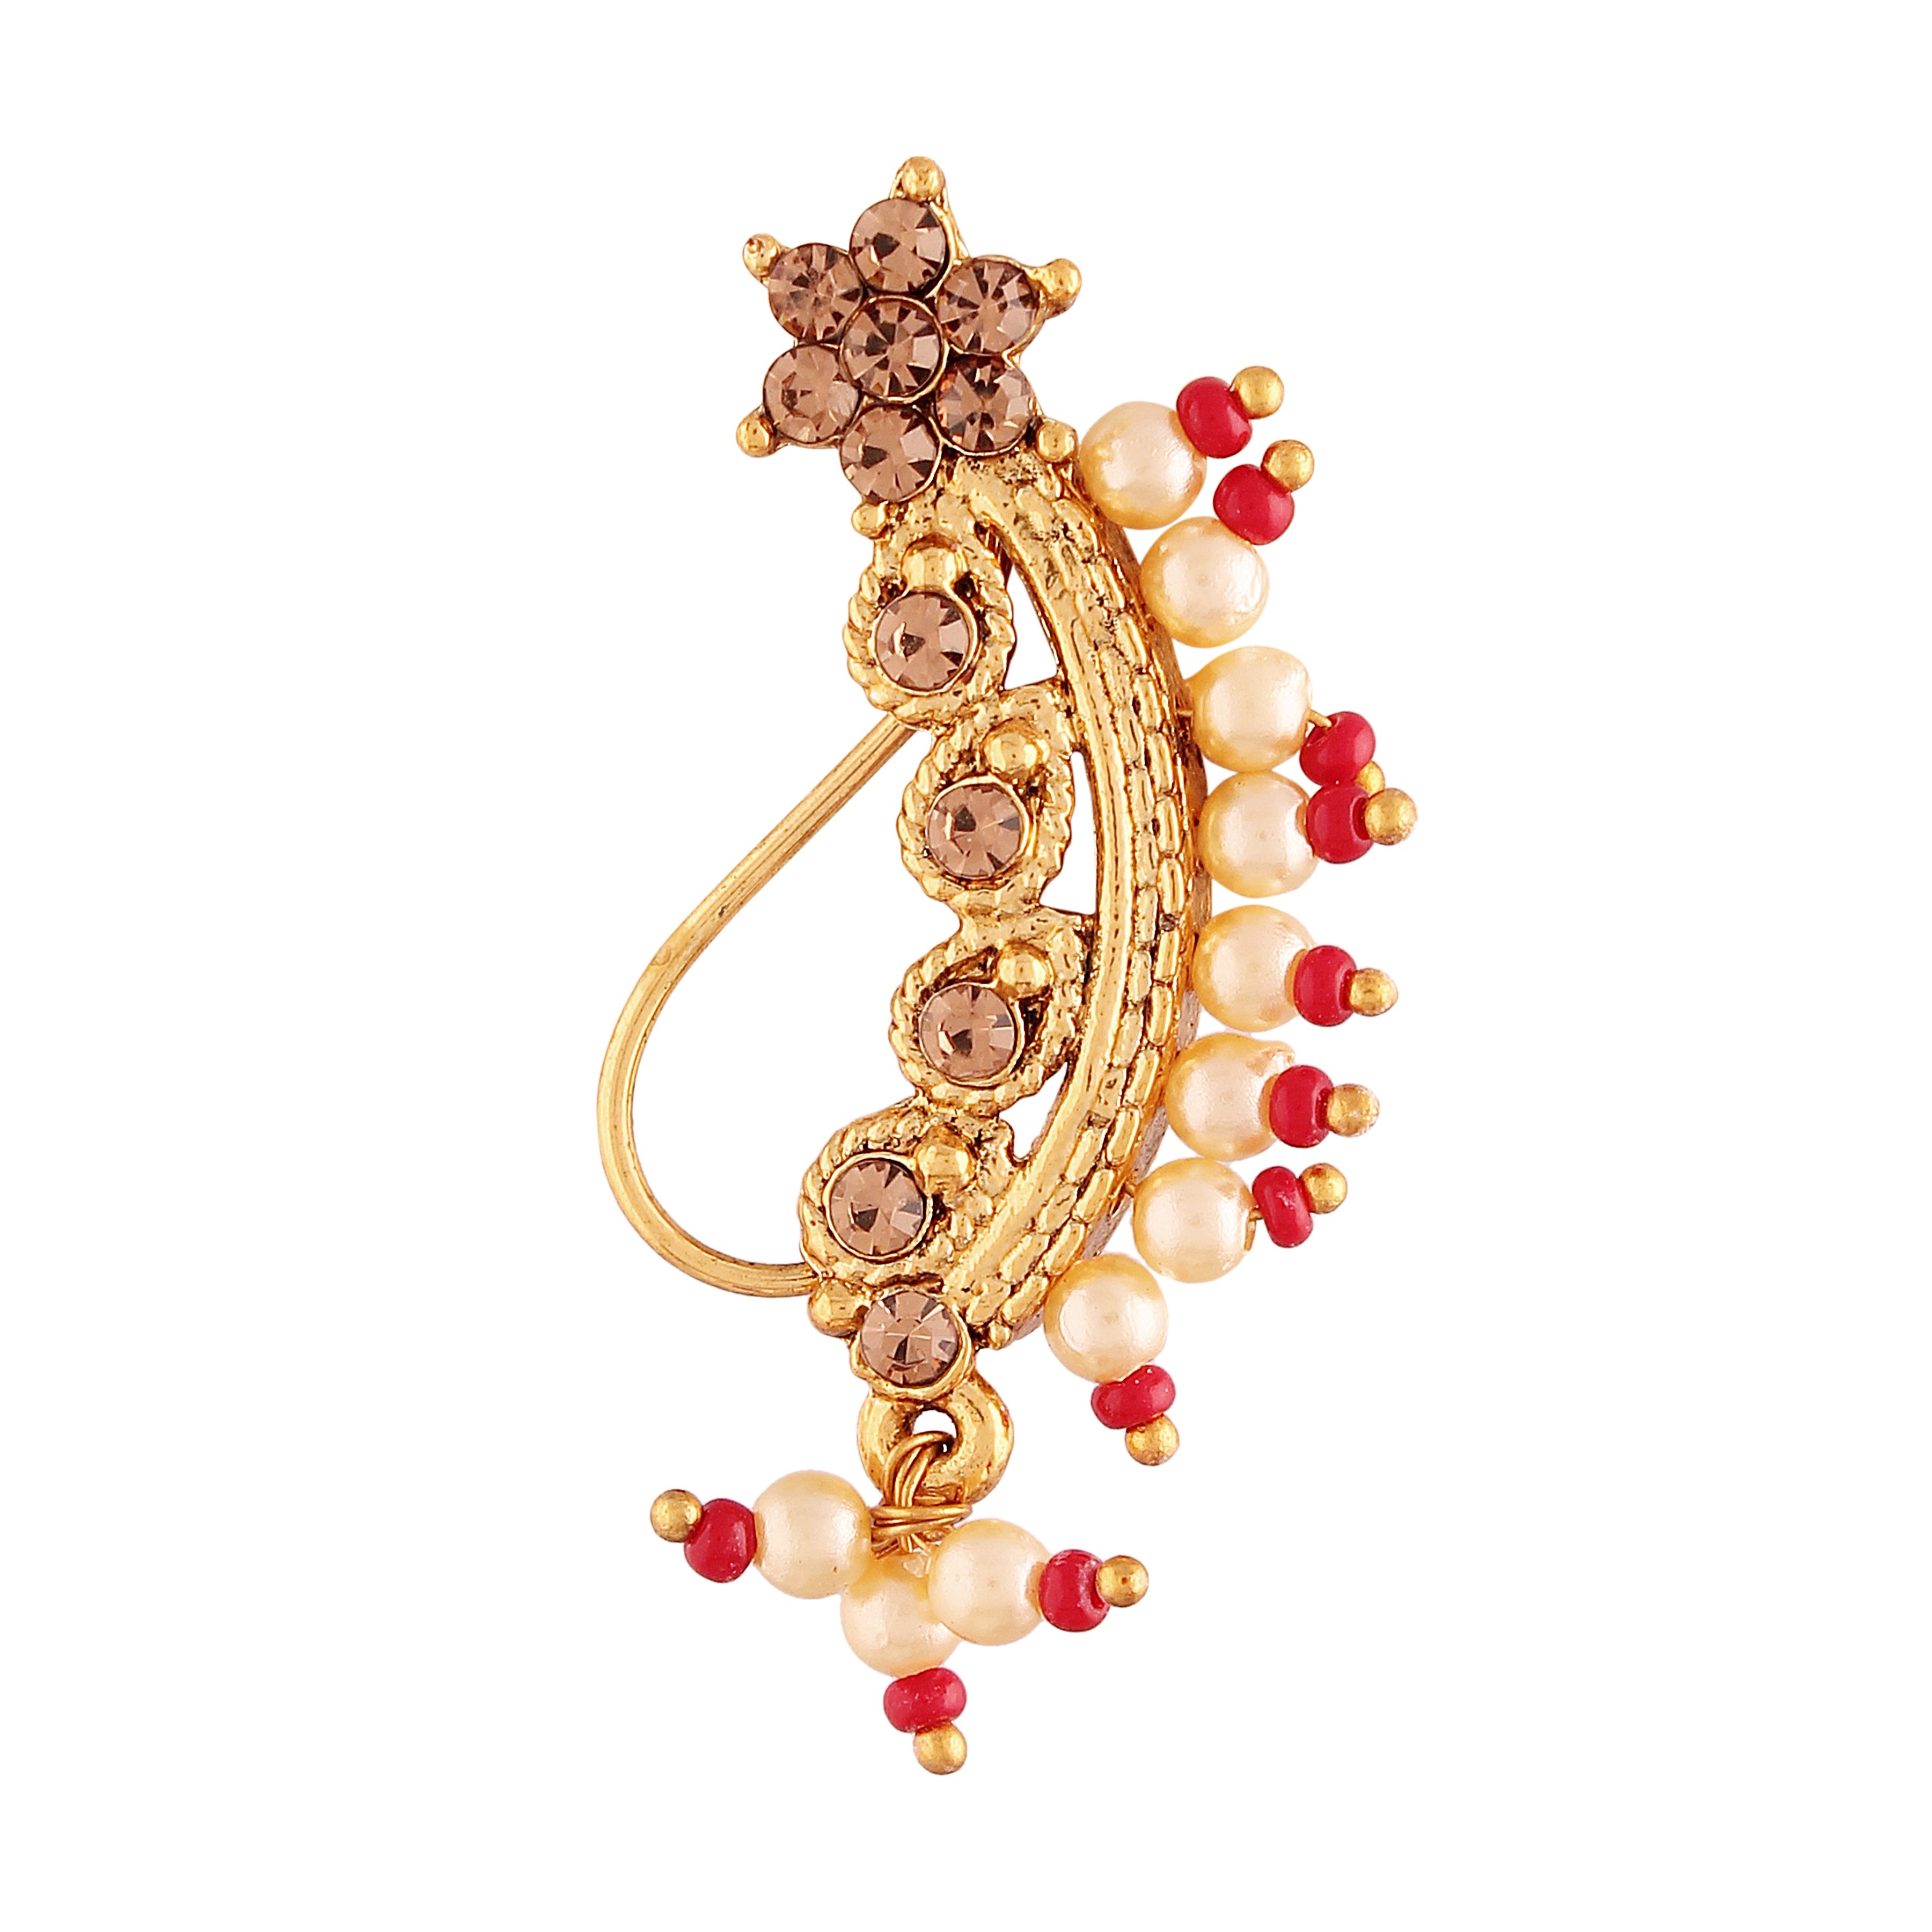 Nose Pin Marathi Style Gold Finish With Pearls By I Jewels